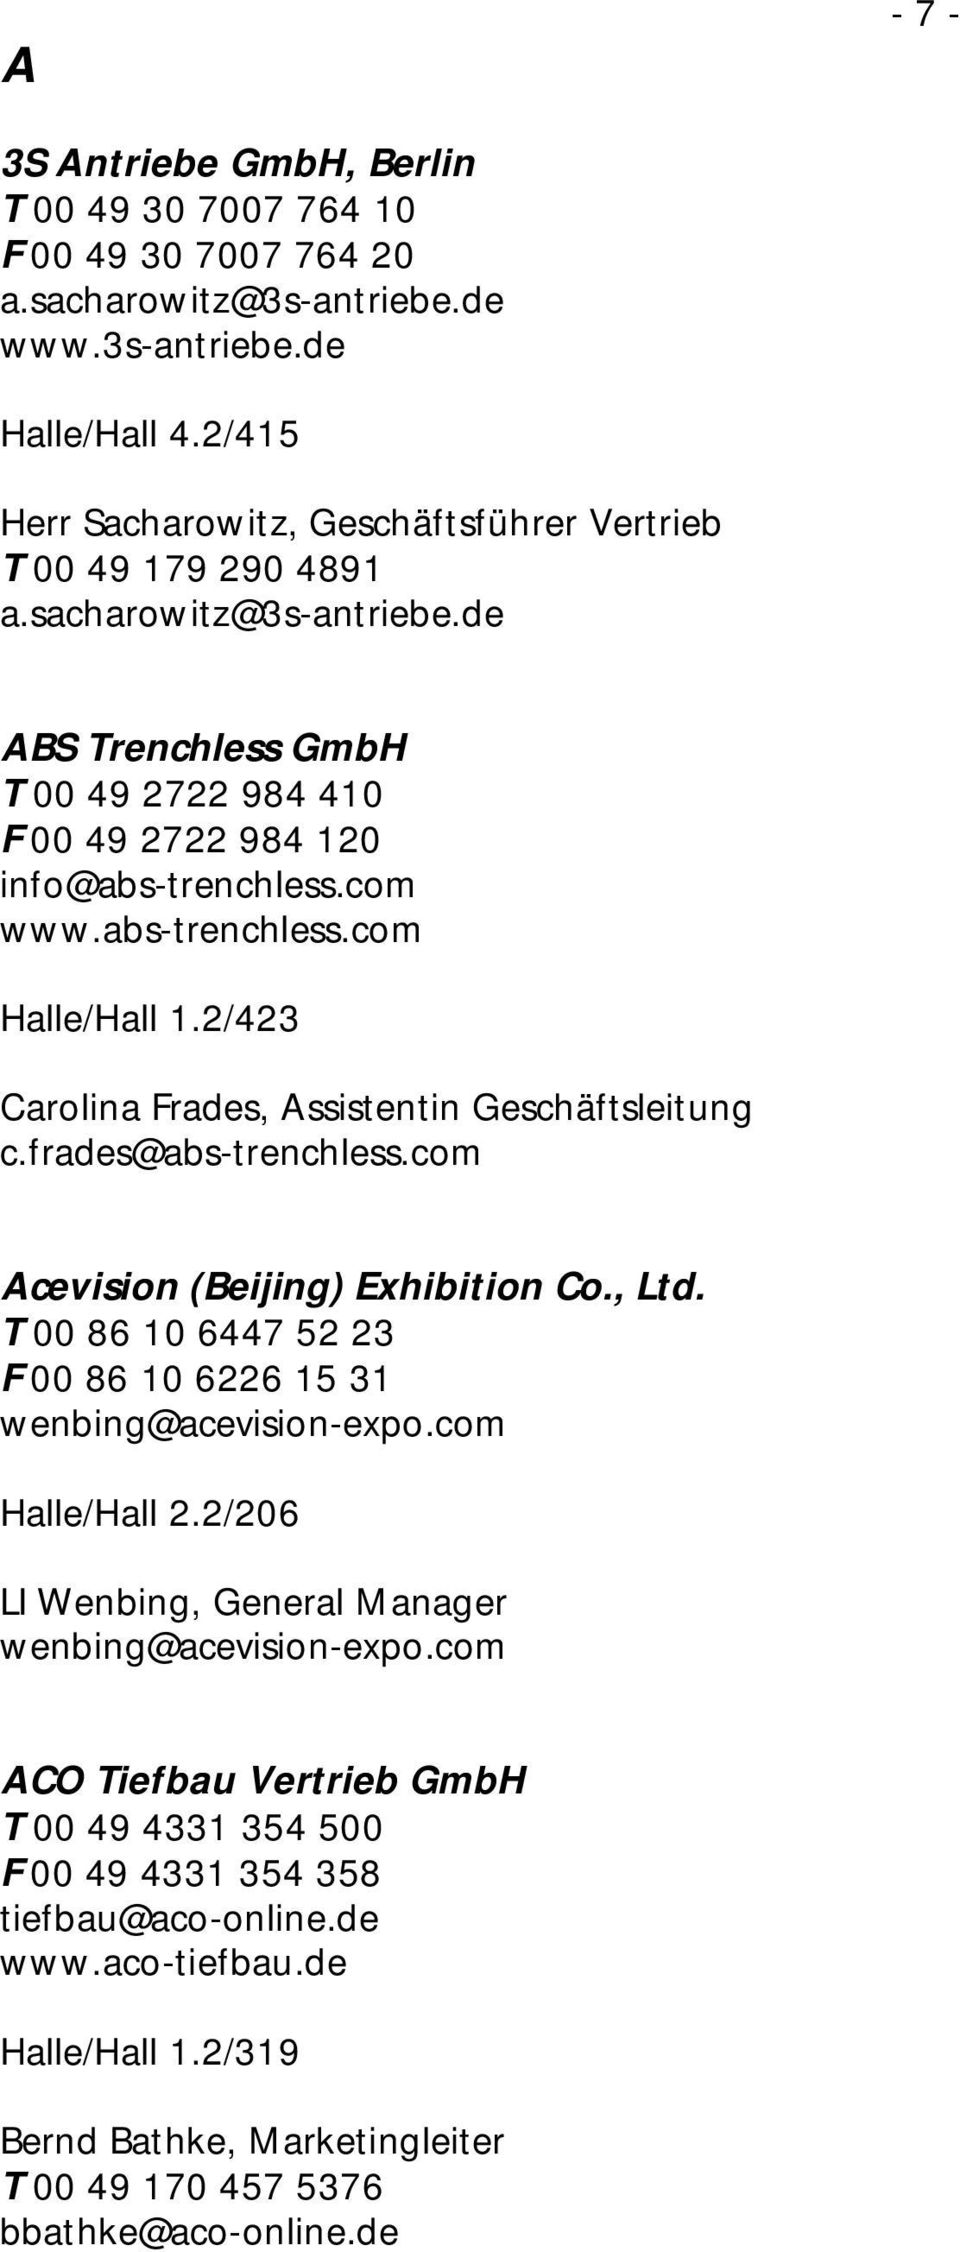 abs-trenchless.com Halle/Hall 1.2/423 Carolina Frades, Assistentin Geschäftsleitung c.frades@abs-trenchless.com Acevision (Beijing) Exhibition Co., Ltd.